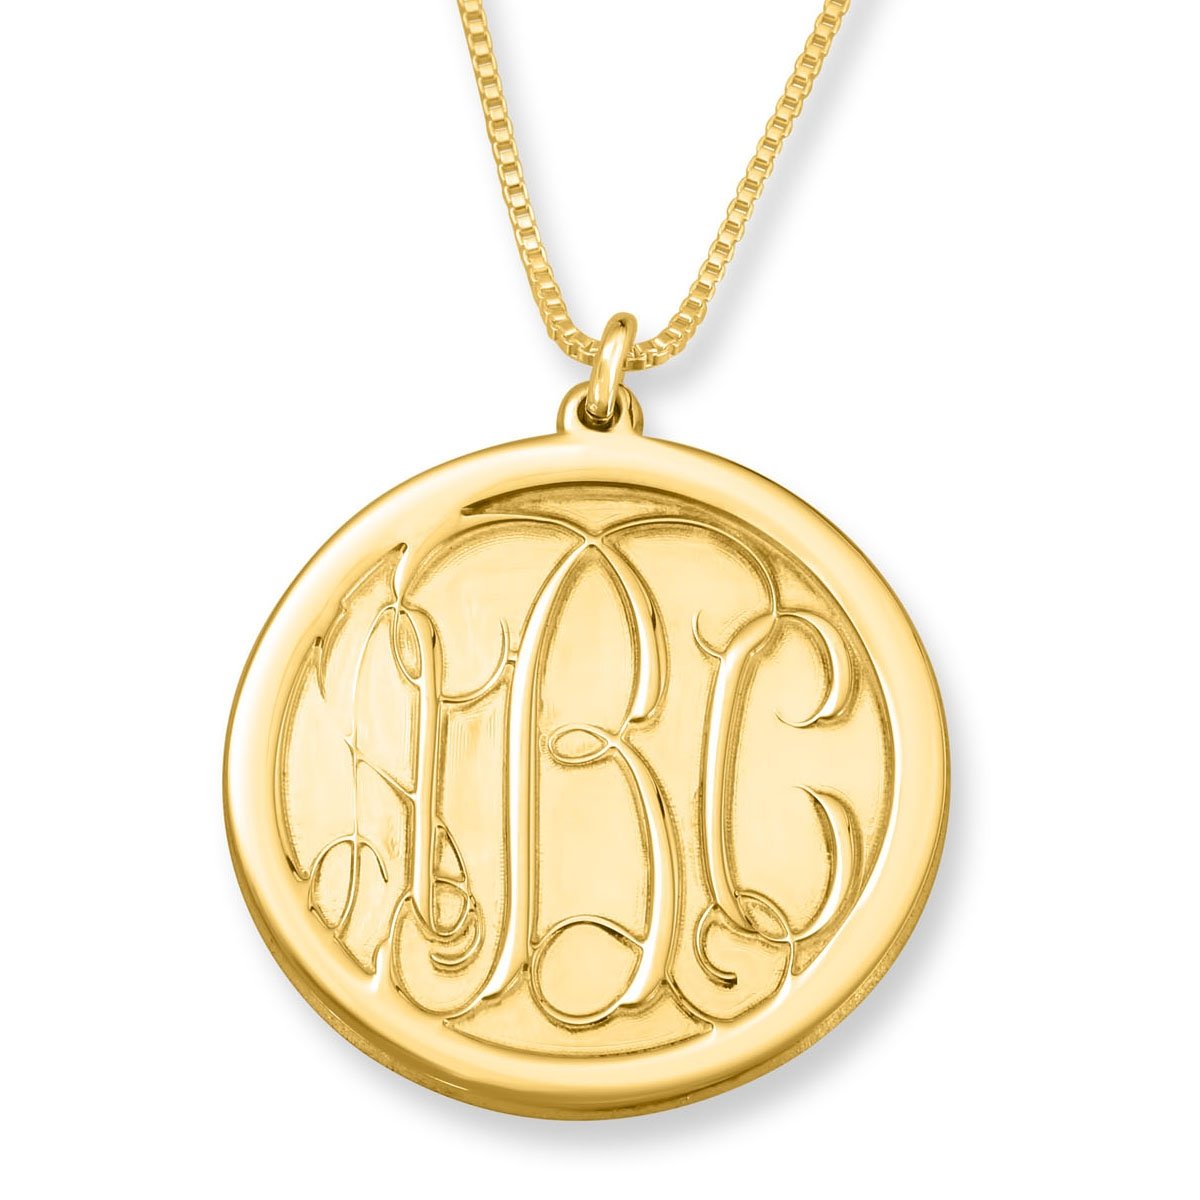 24k Gold Plated Silver Engraved Monogram Circle Necklace-Script Font - 1